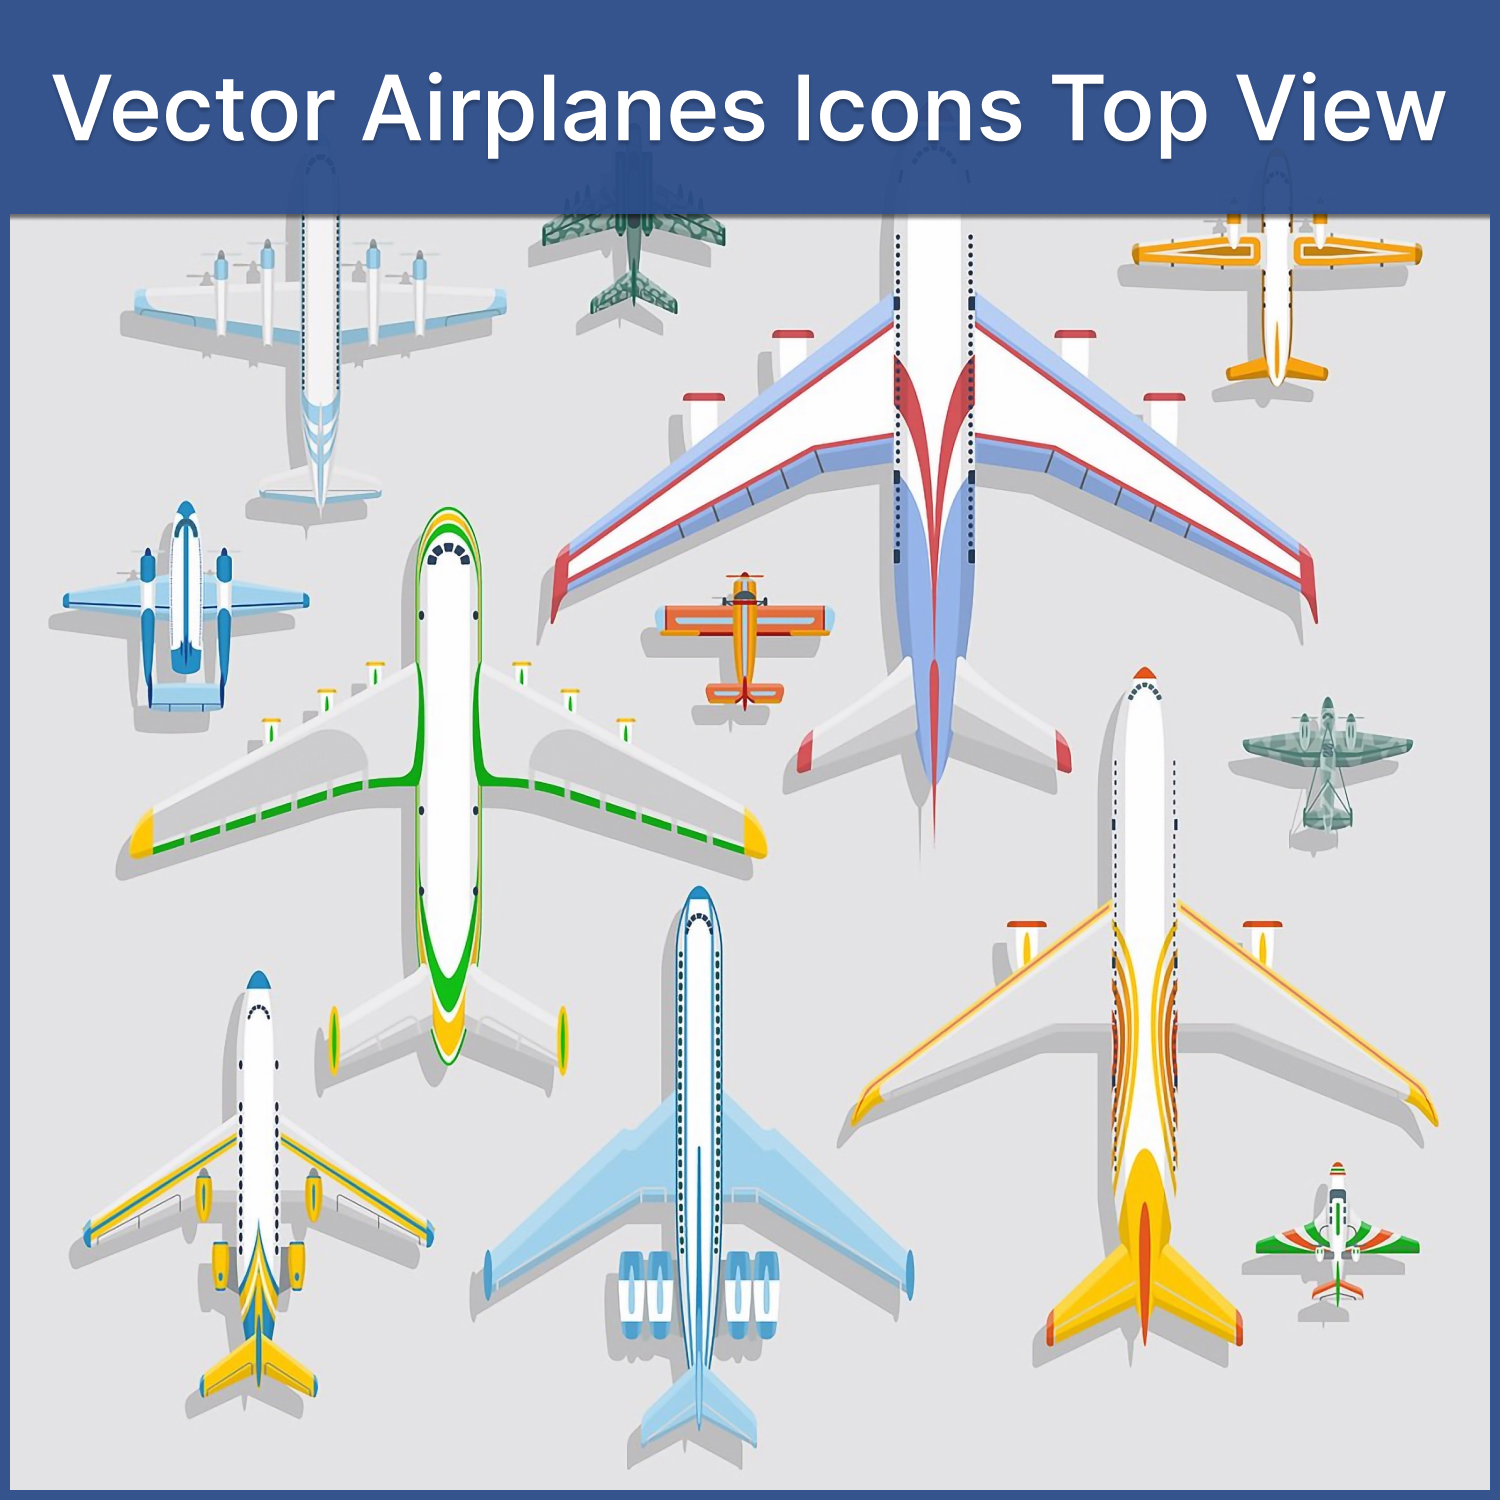 Vector airplanes icons top view.